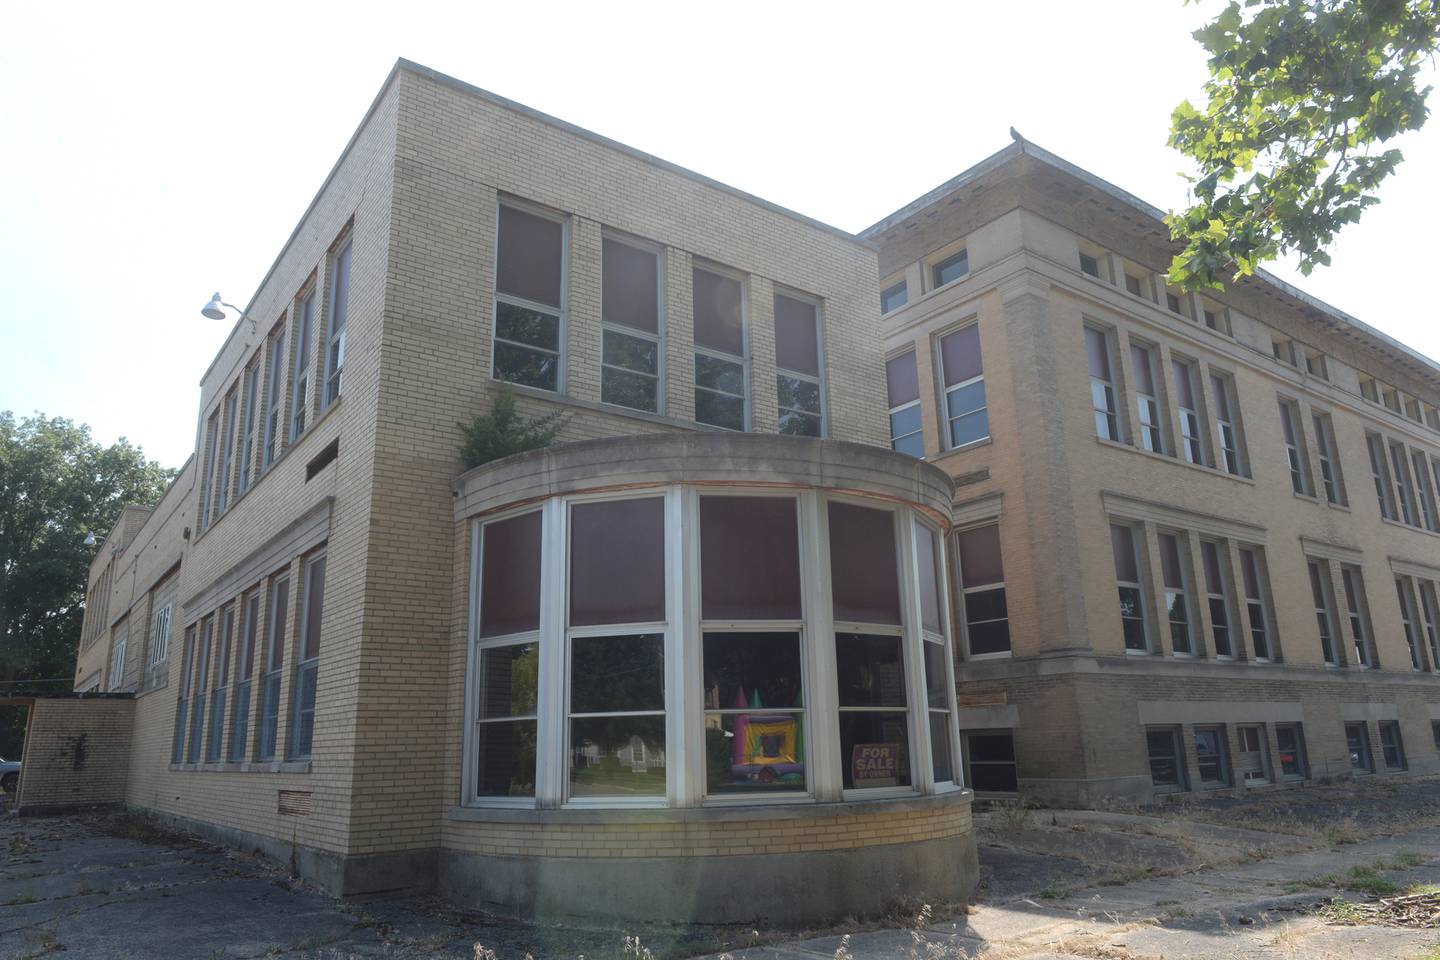 The Congress School in Polo has been empty for several years. It is located at 208 N. Congress Ave. This photo is of the northwest corner of the building.